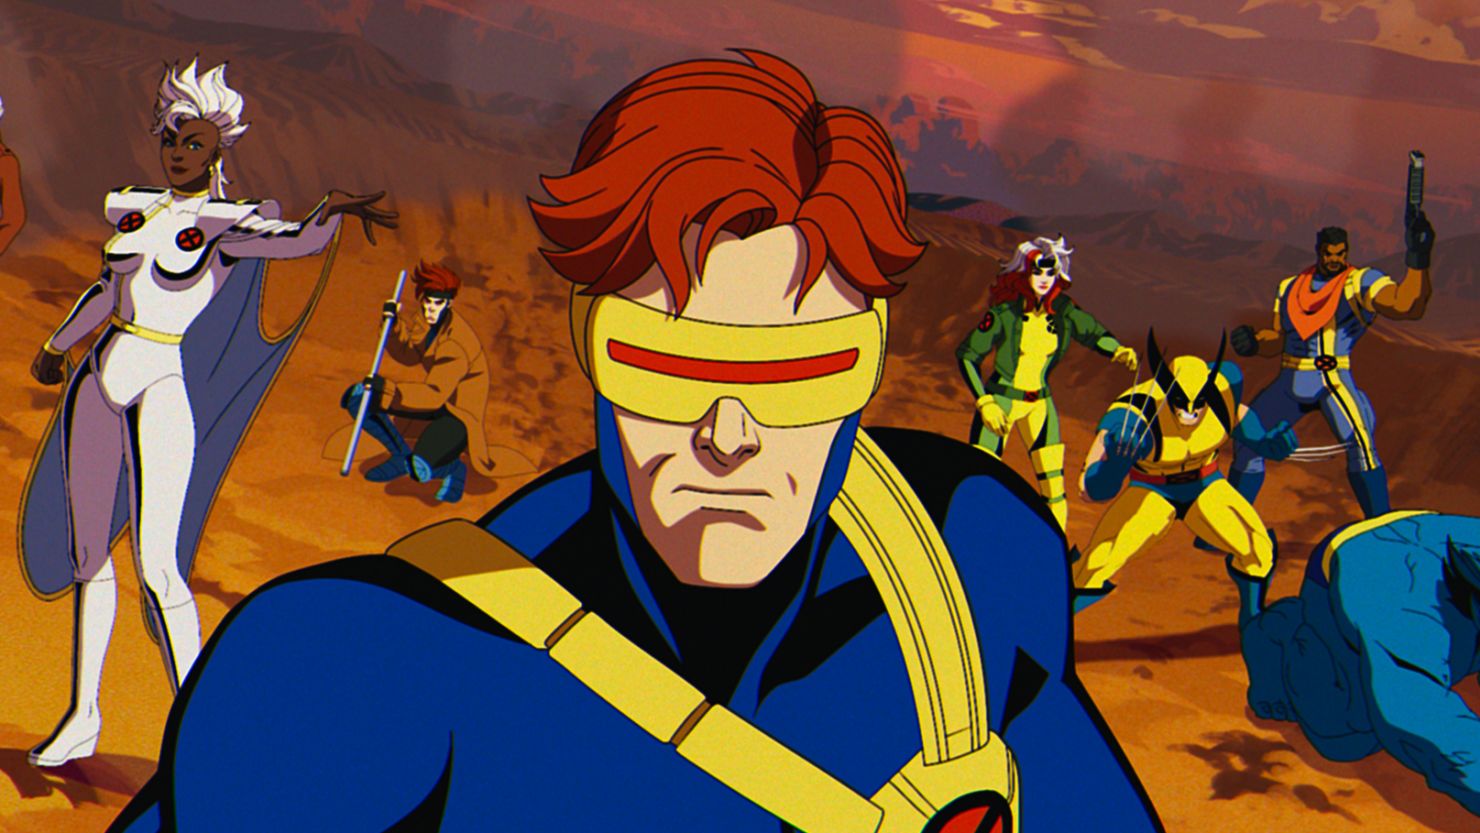 "X-Men '97" (featuring Cyclops, center) revives the animated series from the 1990s.